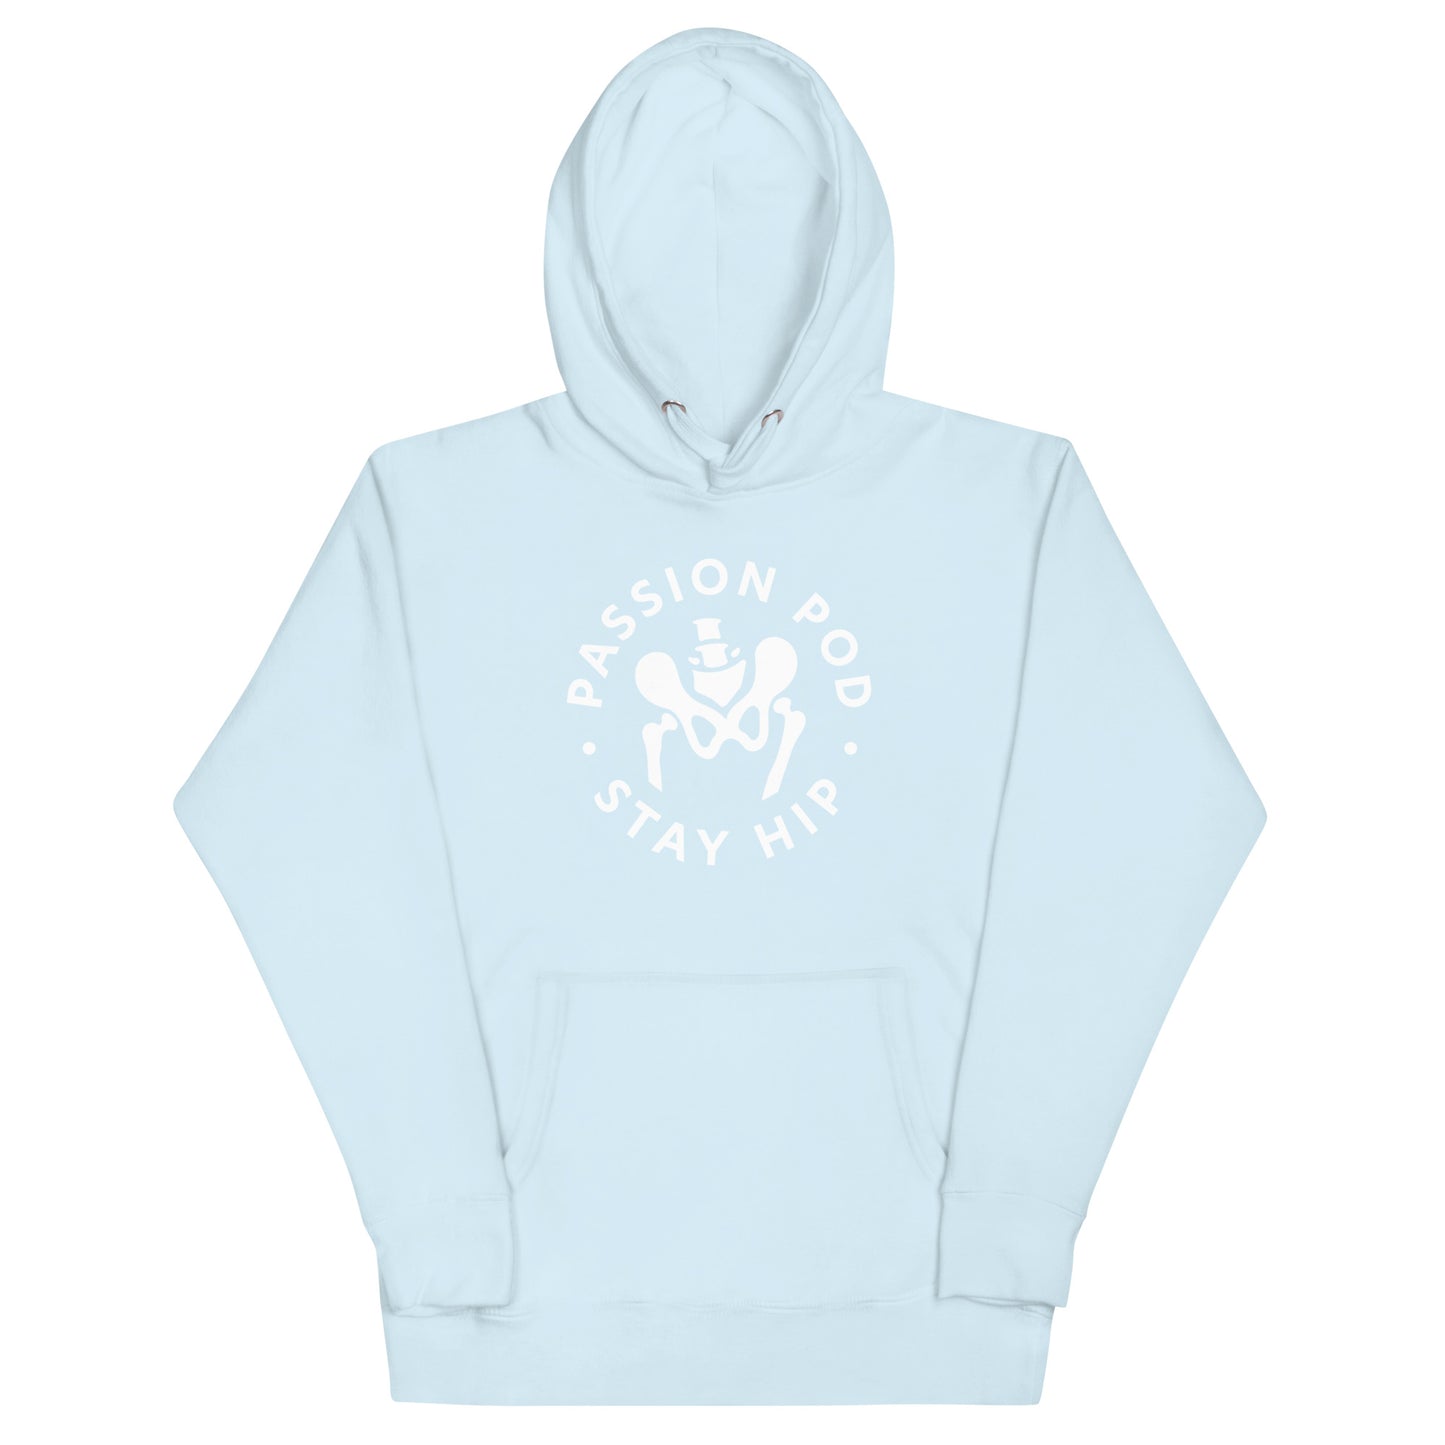 Stay Hip Pullover Hoodie